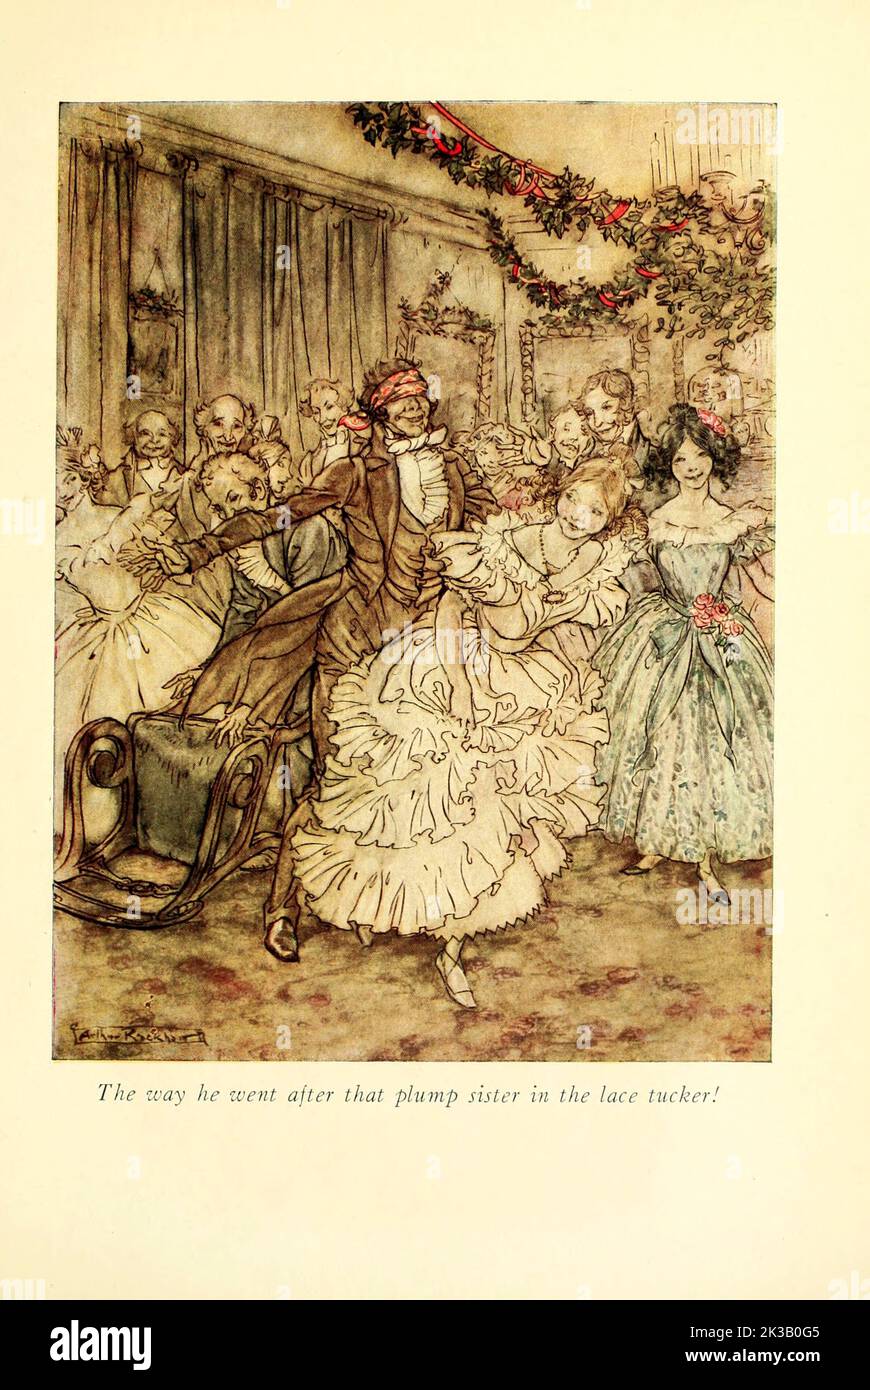 The way he went after that plump sister in the lace tucker Illustrated by Arthur Rackham from the book ' A Christmas carol ' by Charles Dickens, Publication date 1915 Publisher London : William Heinemann ; Philadelphia : J.B. Lippincott Co. Stock Photo